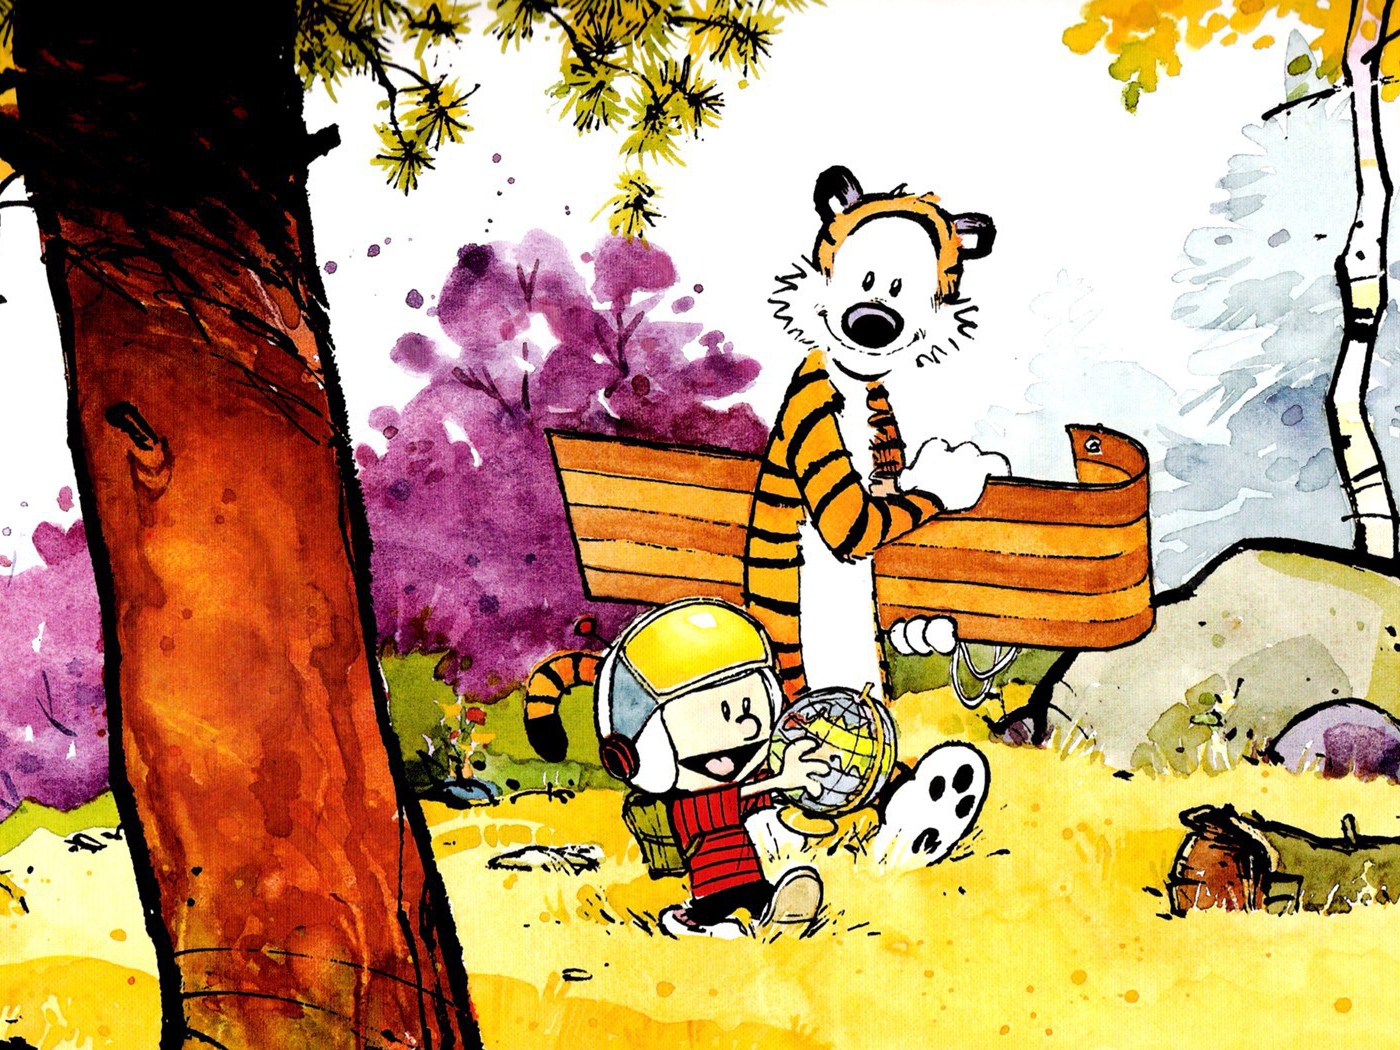 Calvin and Hobbes go for a walk